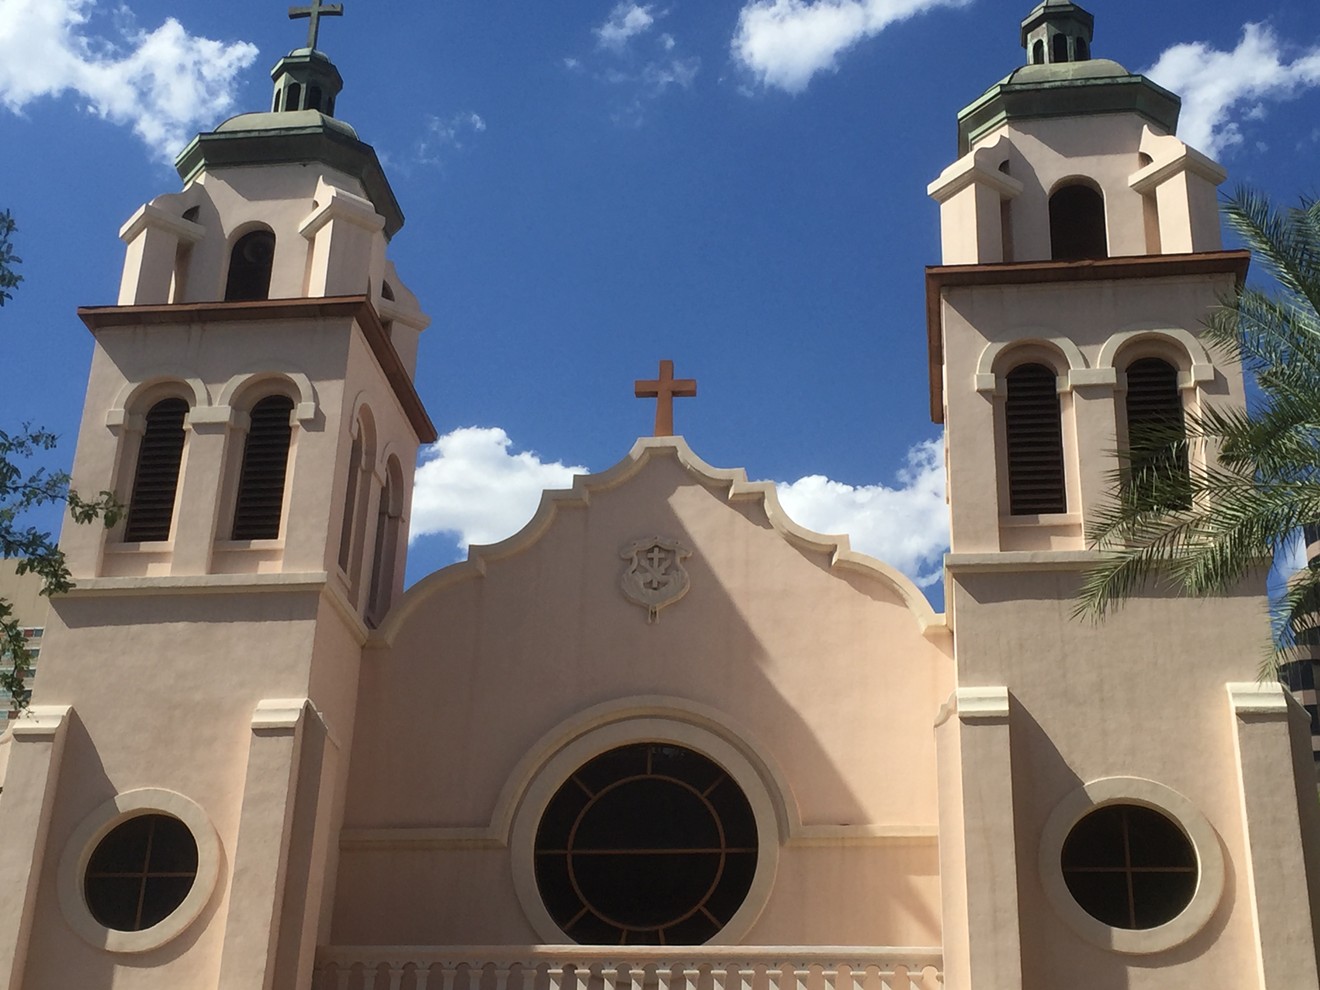 Saint Mary's Basilica sits next to the Diocese of Phoenix